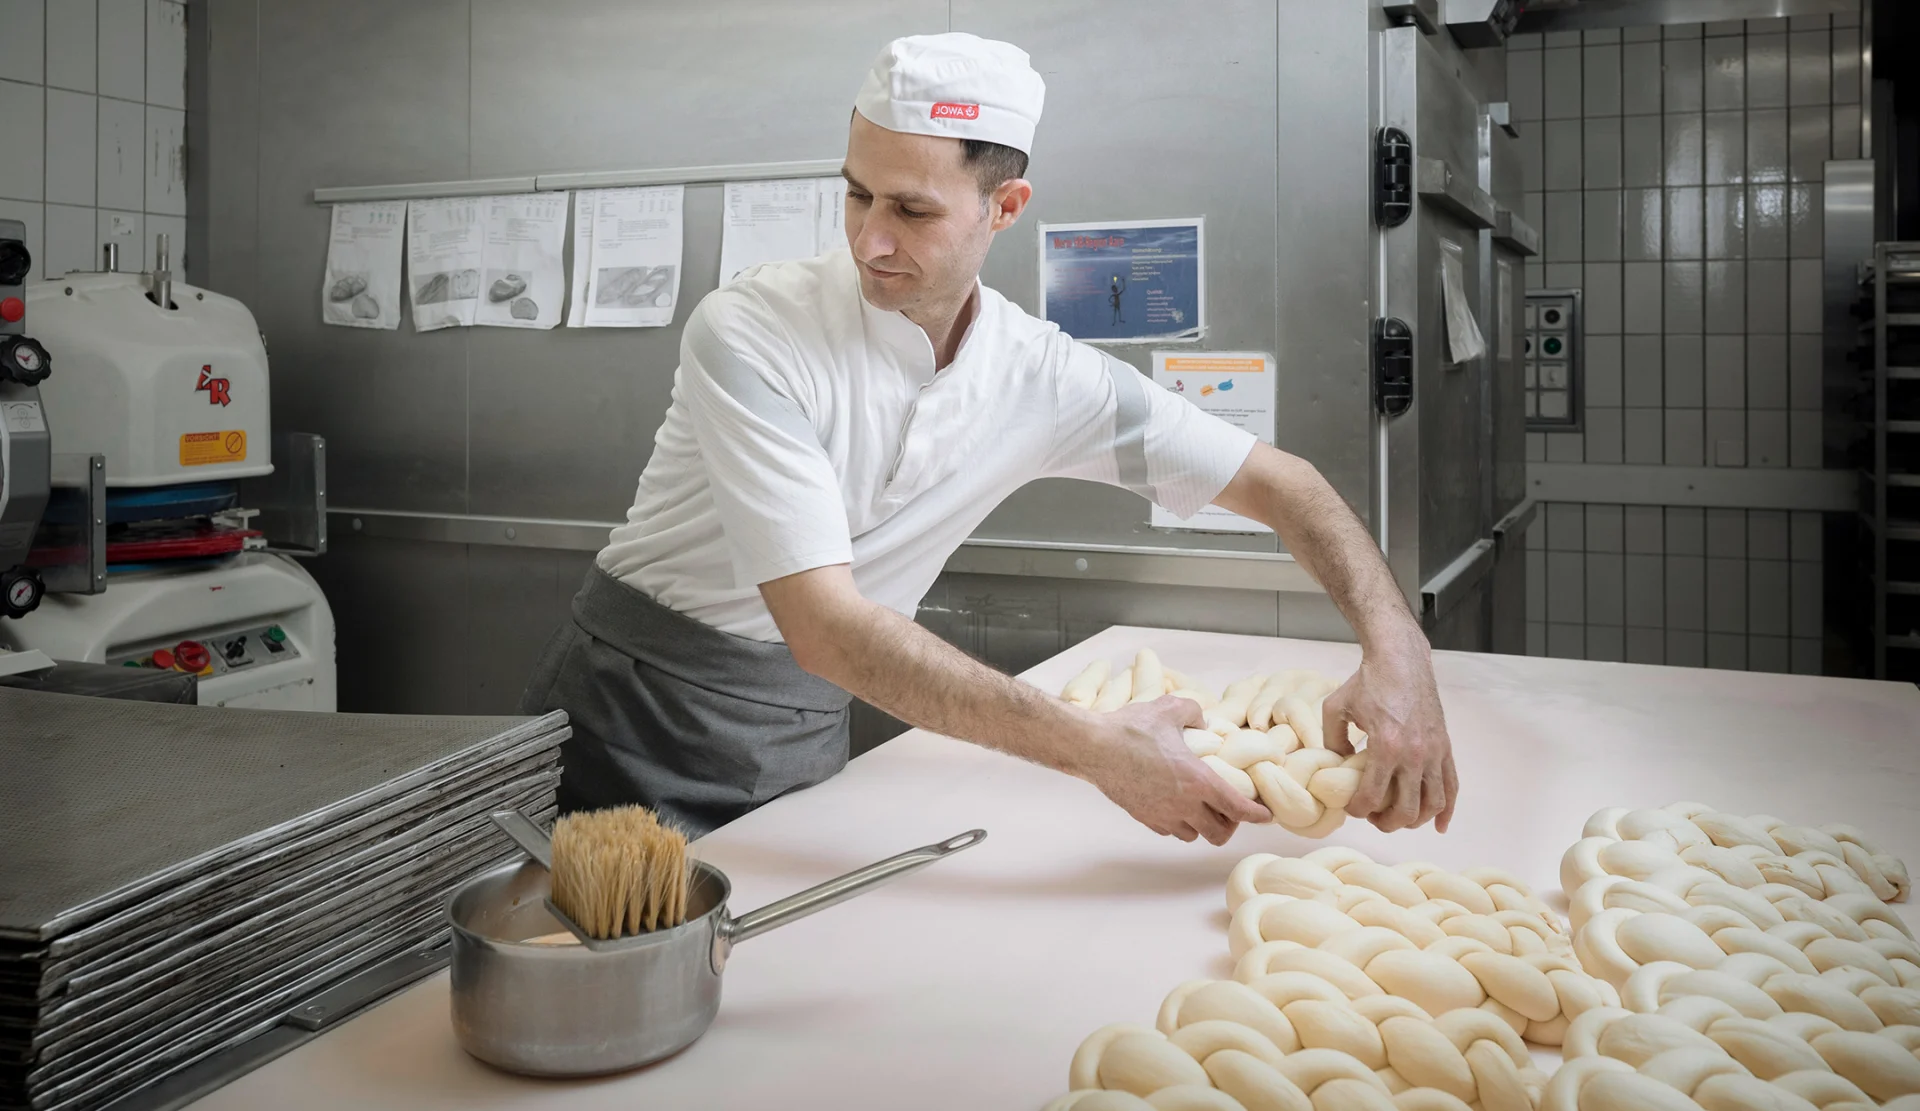 In the Bern bakery, Fuad Asaad weaves dough into braided bread.